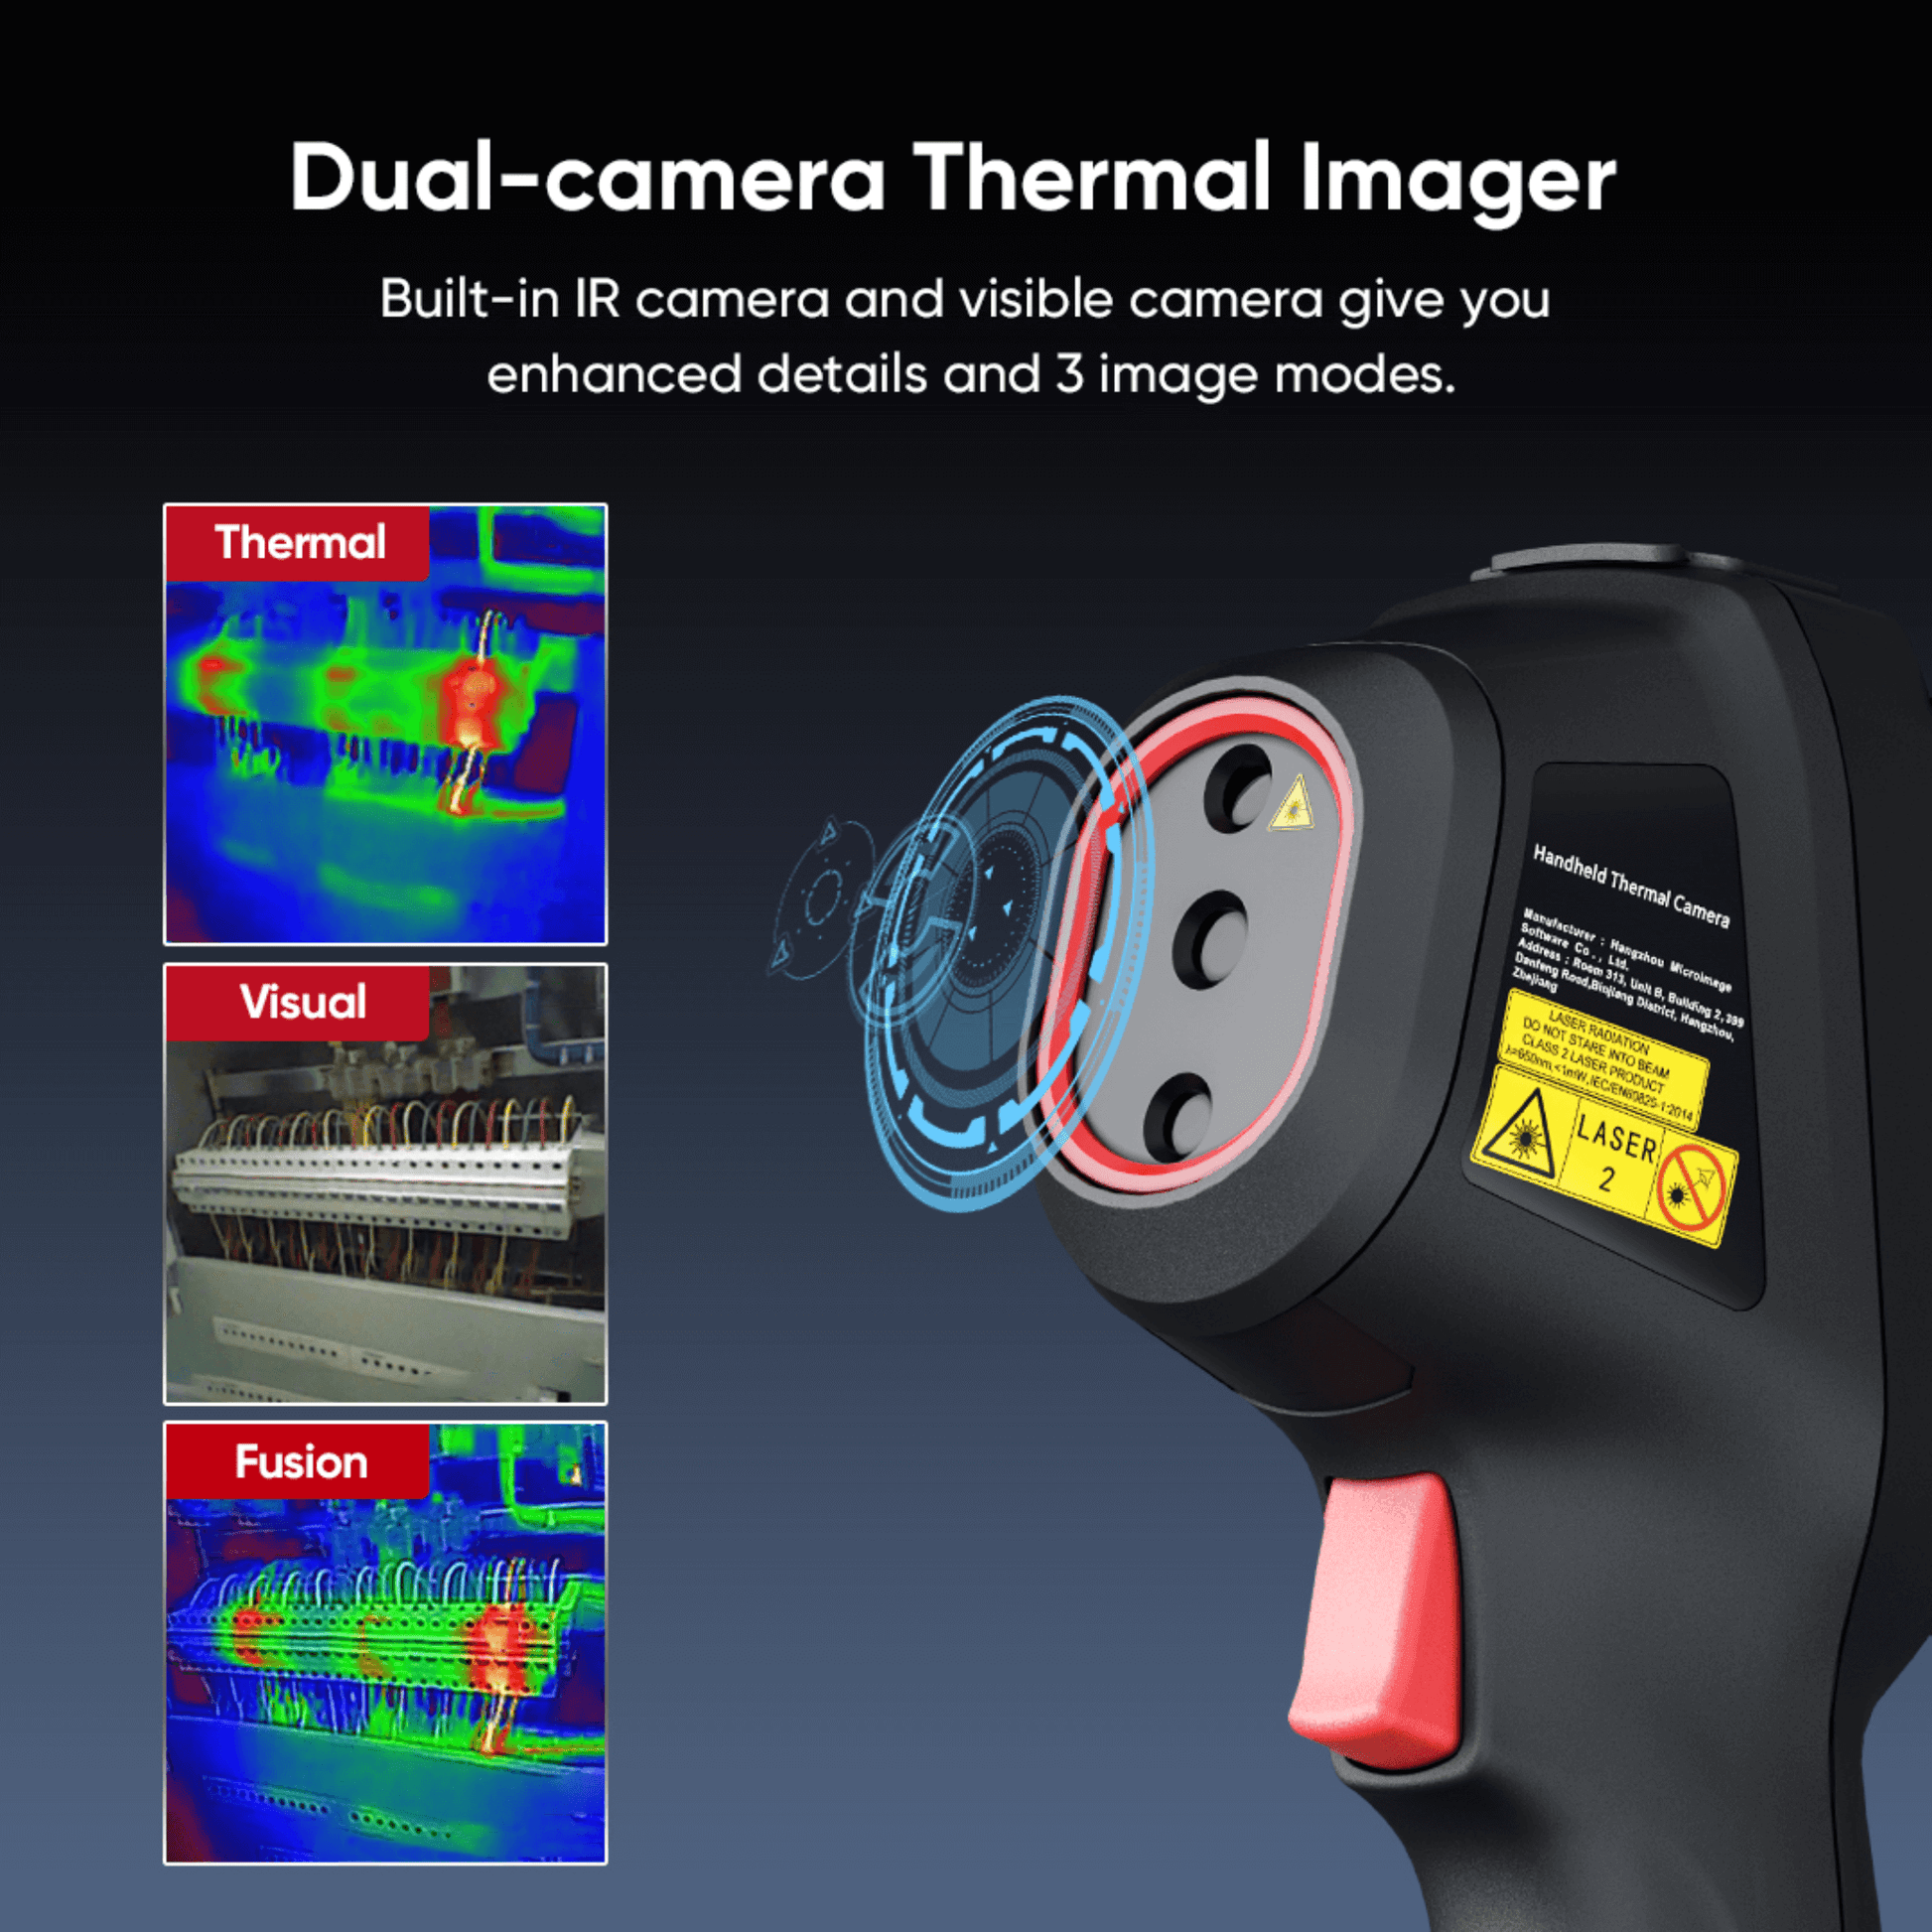 Built in Thermal and Visual Camera on the Bi-Spectrum HikMicro Eco-V Handheld Thermal Imager 